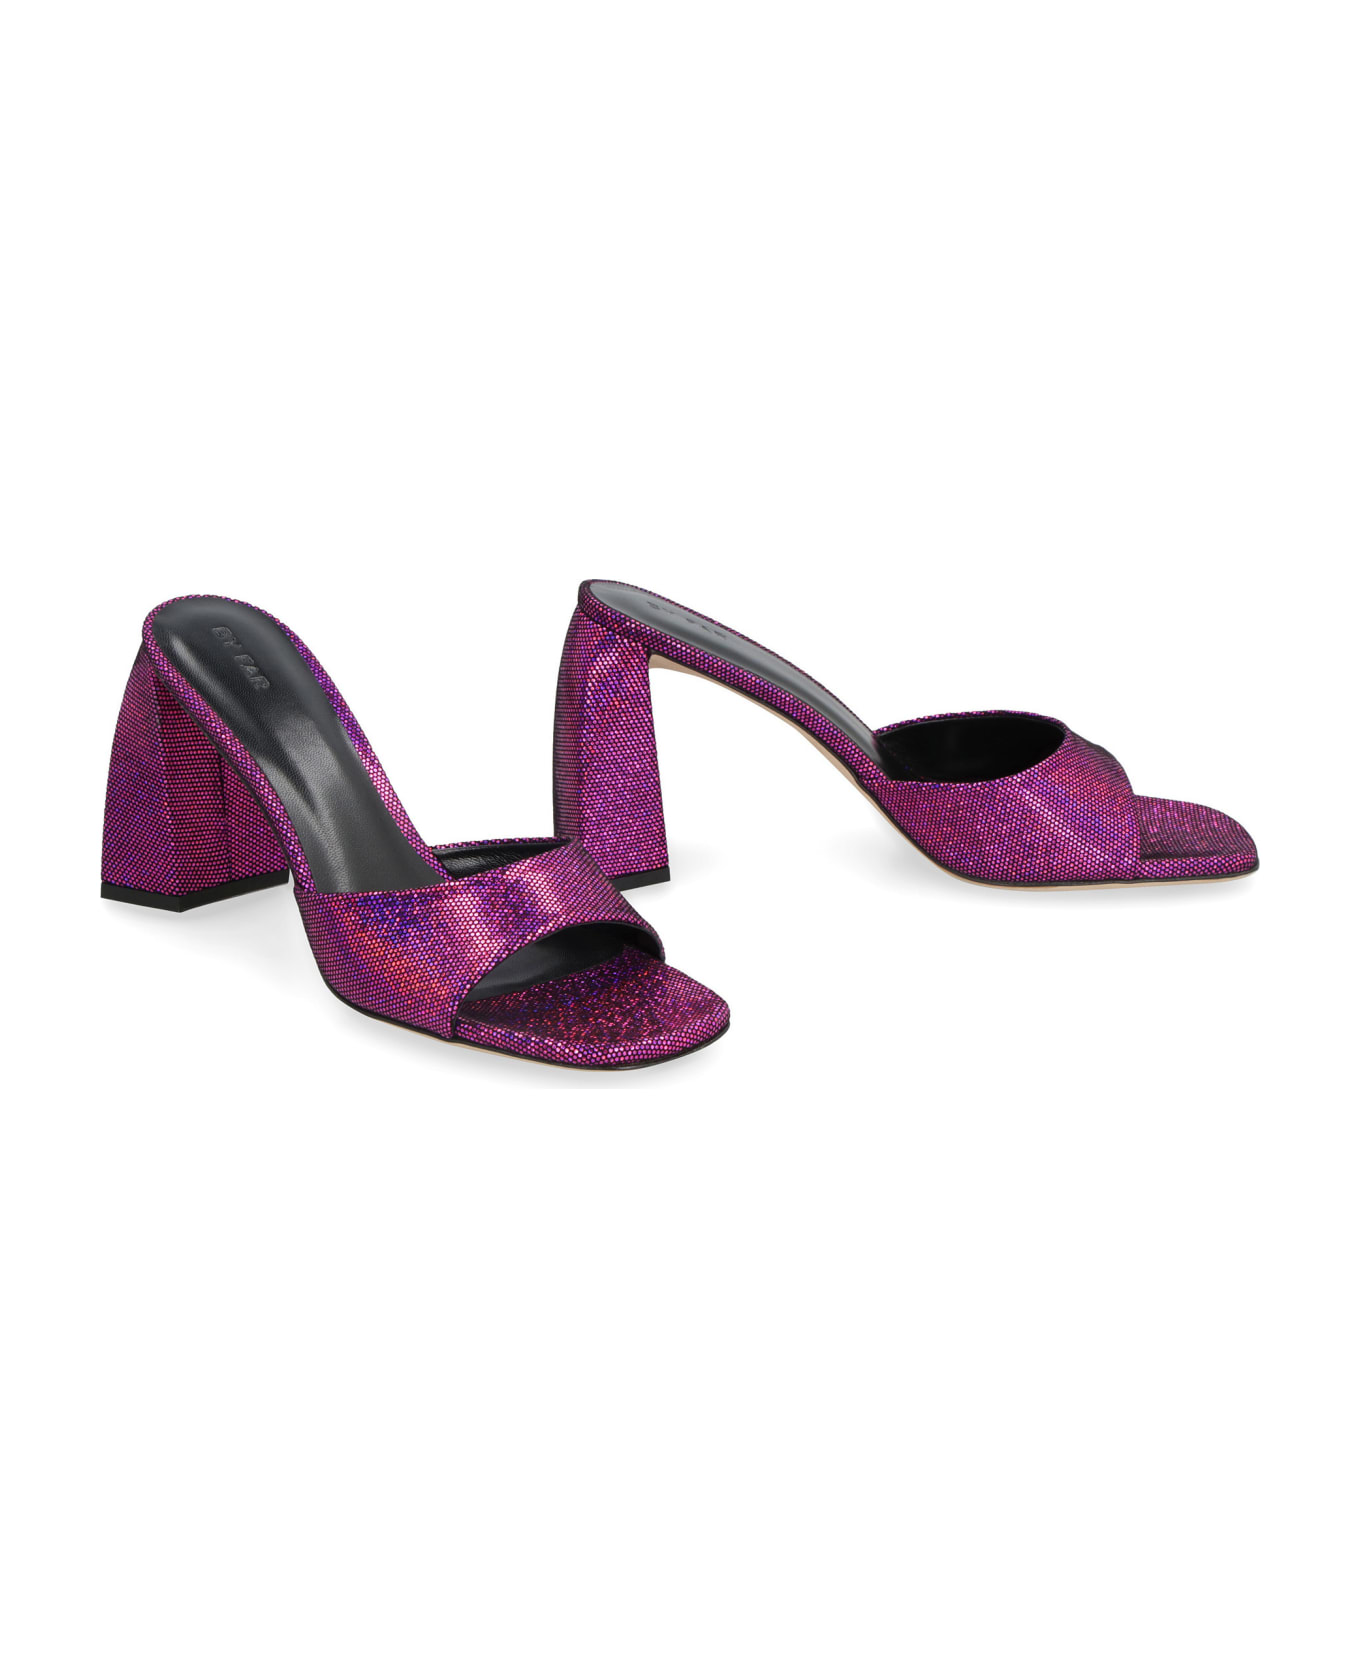 BY FAR Michele Leather Mules - purple